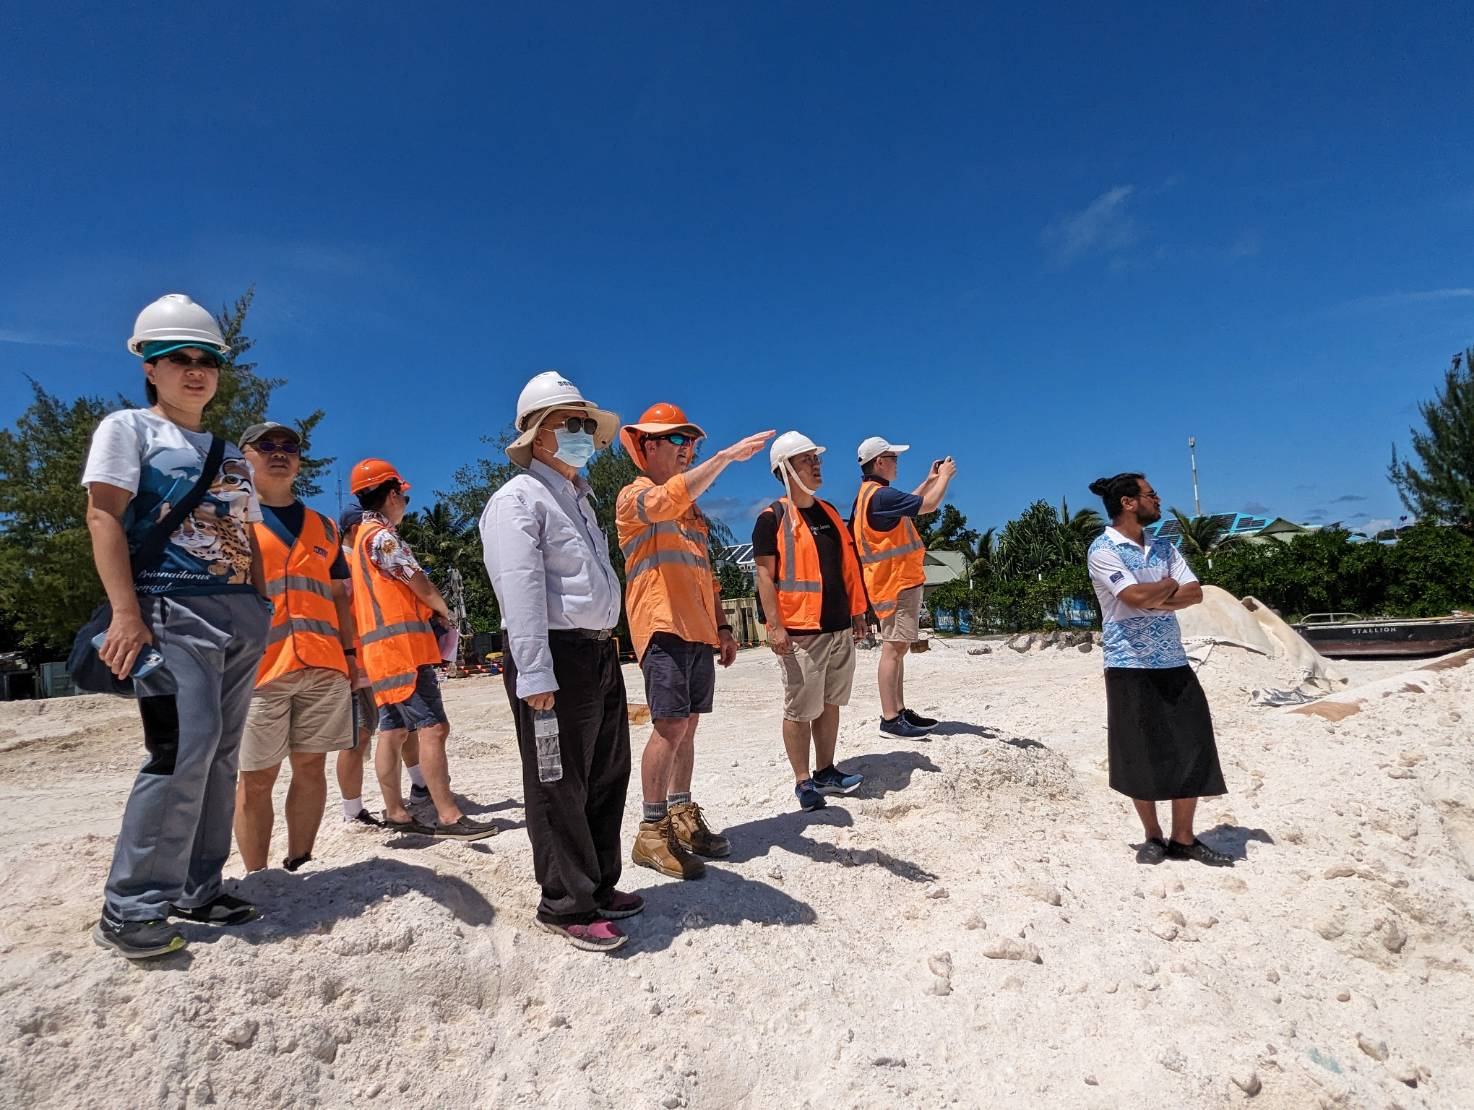 The engineers from Australia introduced land reclamation projects